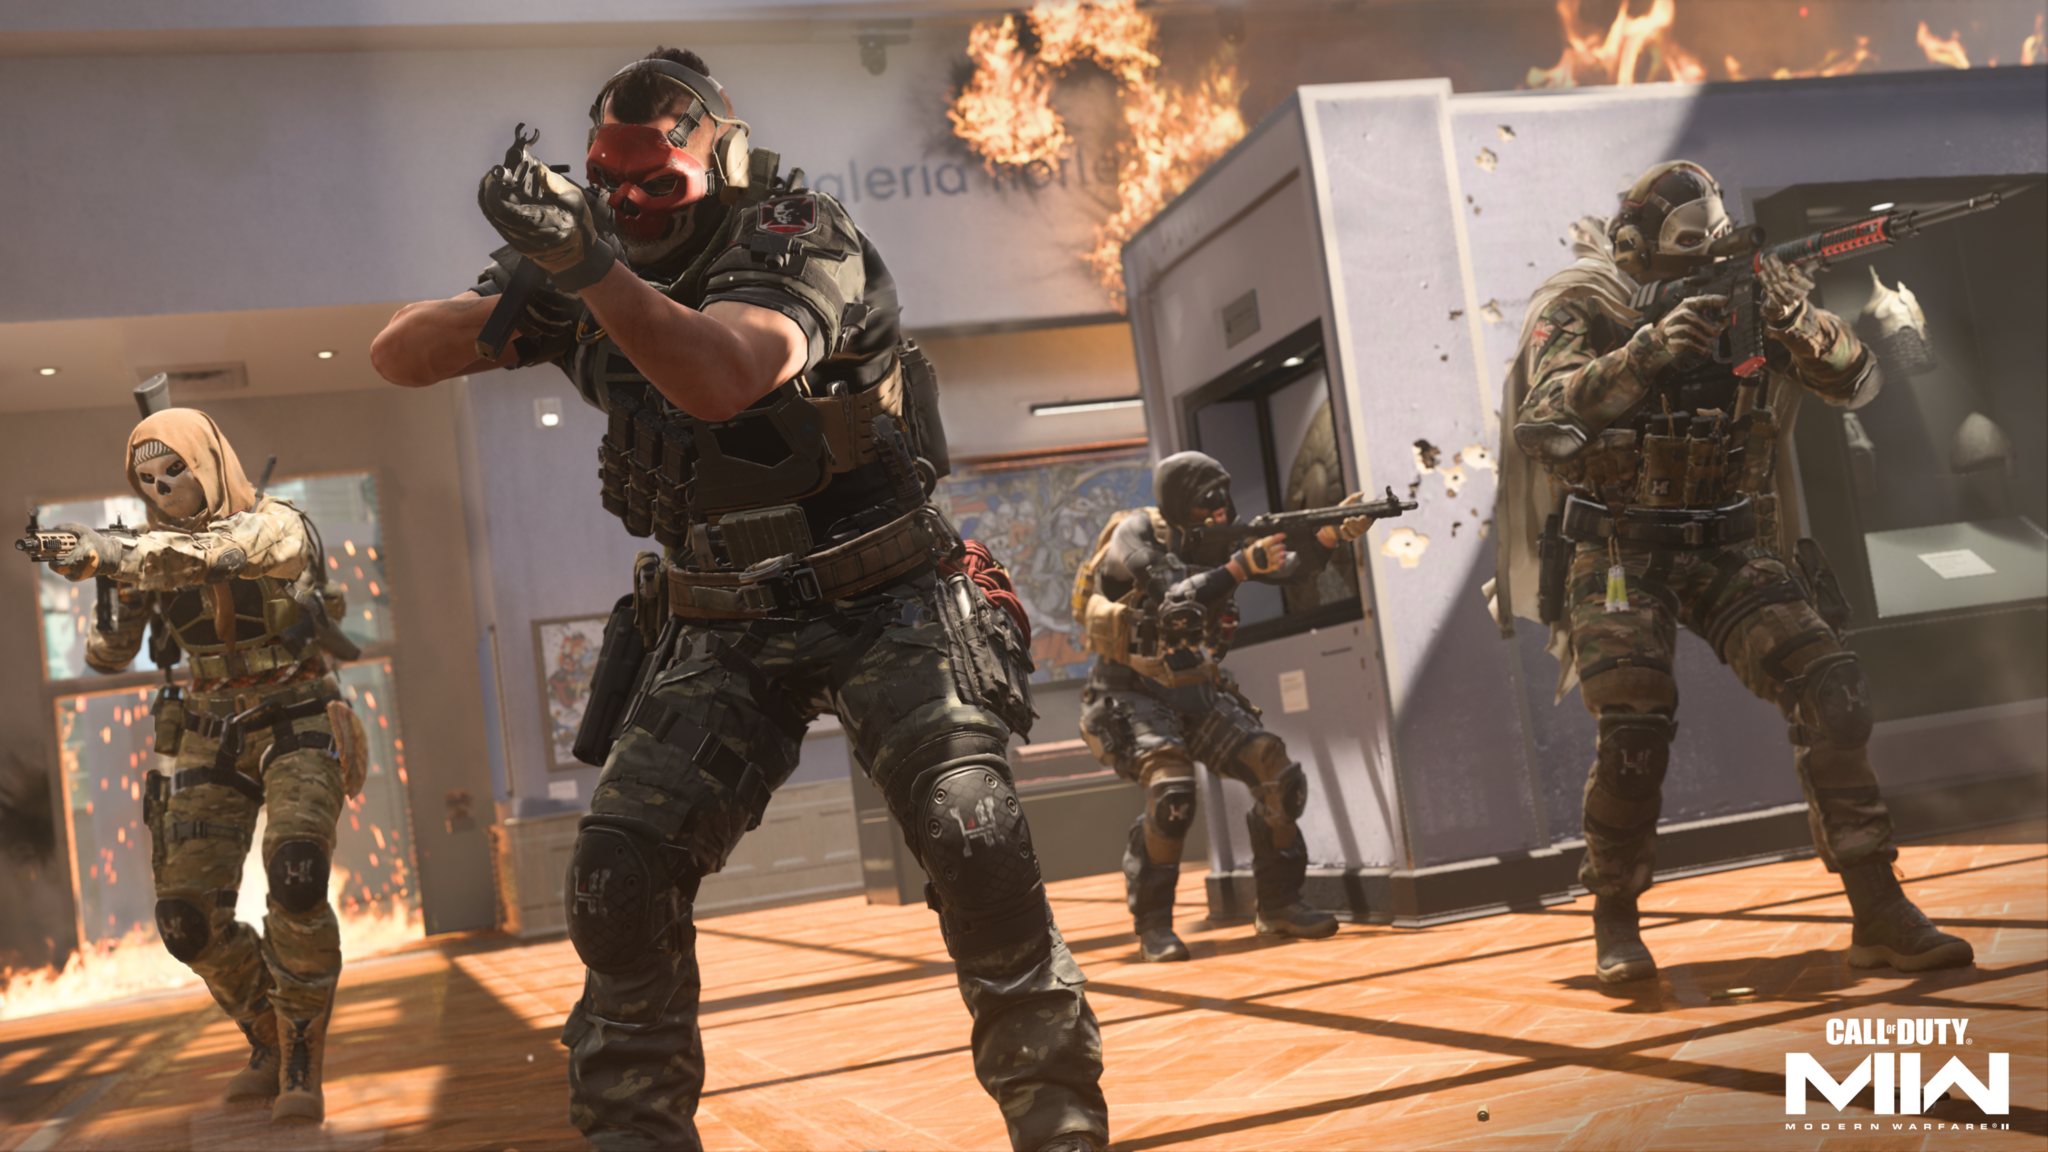 There are 9 New Gamemodes Coming to Modern Warfare 2, it's Claimed